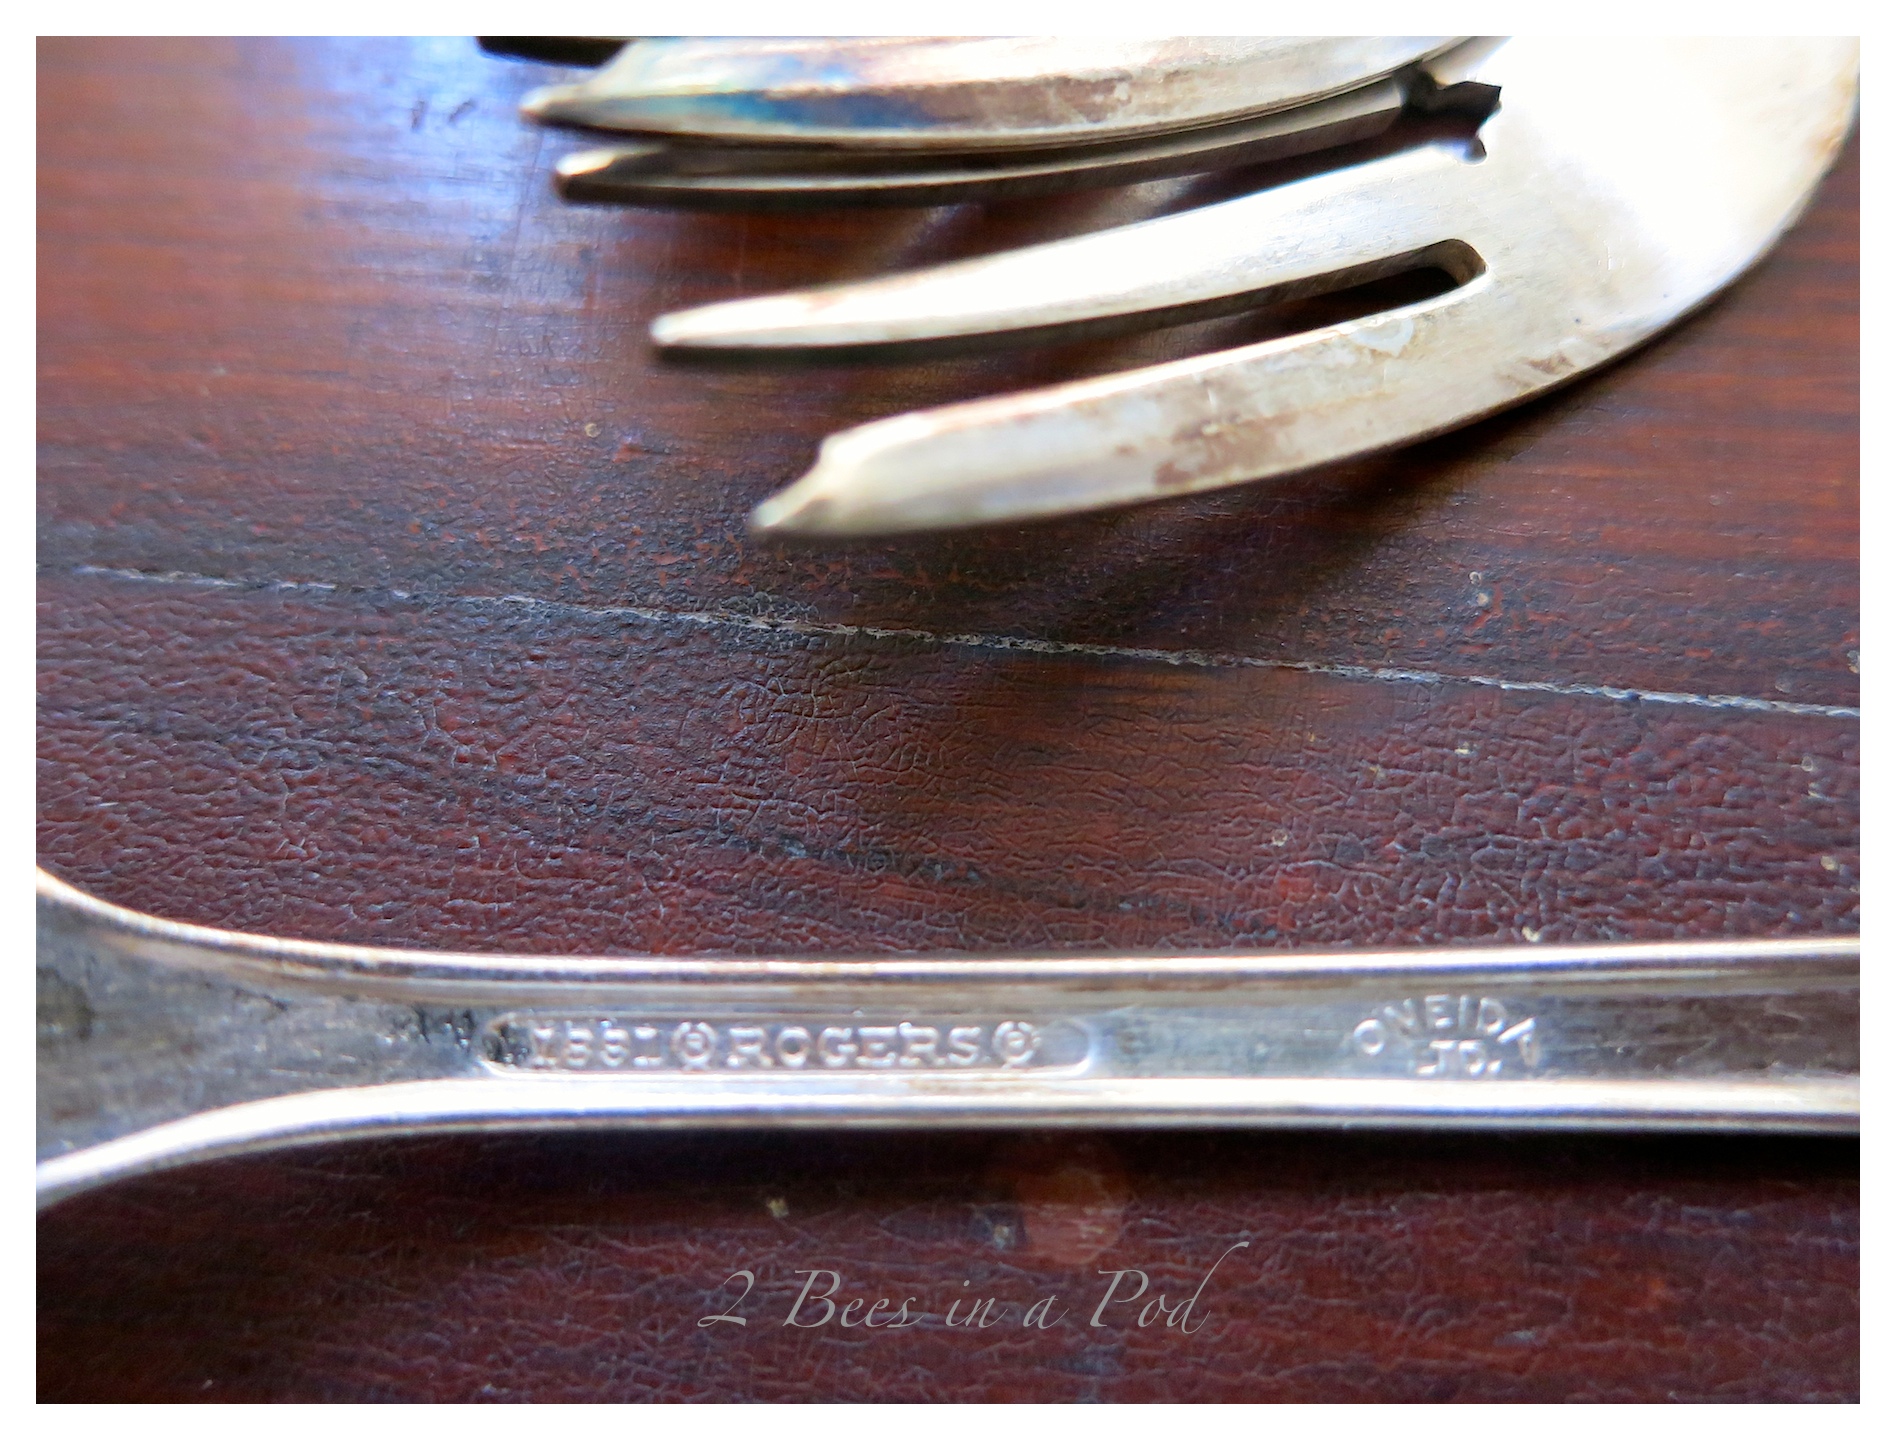 DIY Place card holder using vintage silverware. Easy project that took just minutes to create.